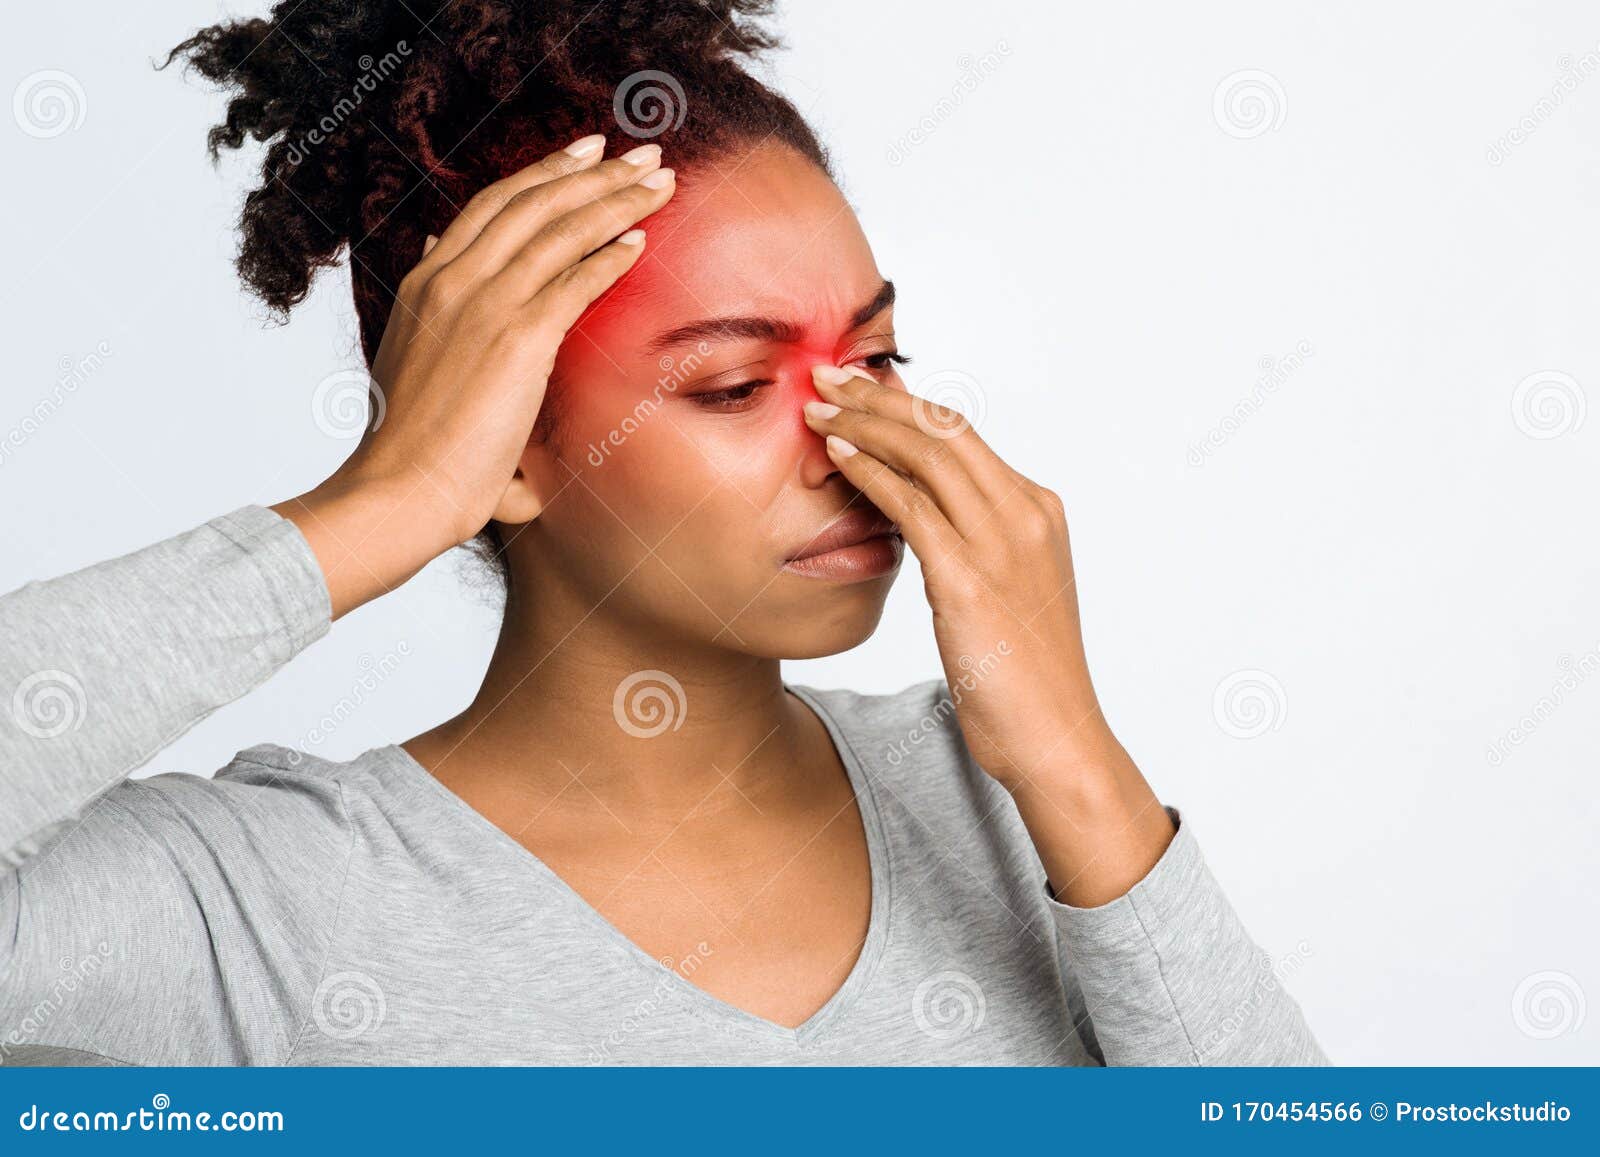 exhausted black girl suffering from sinusitis, rubbing nose and head